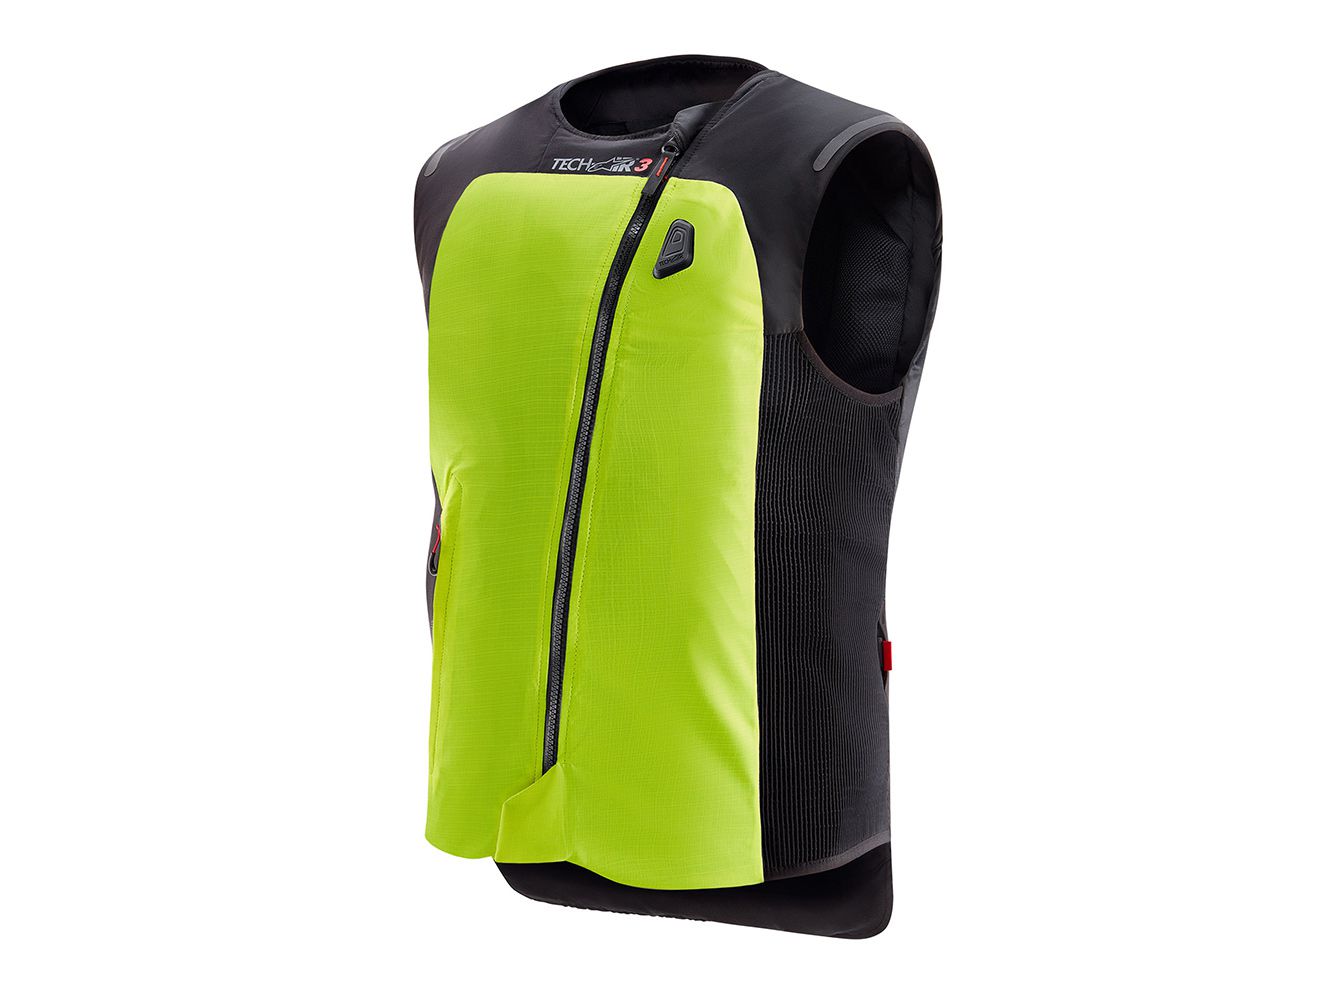 The Tech-Air 3 in black and fluorescent yellow.